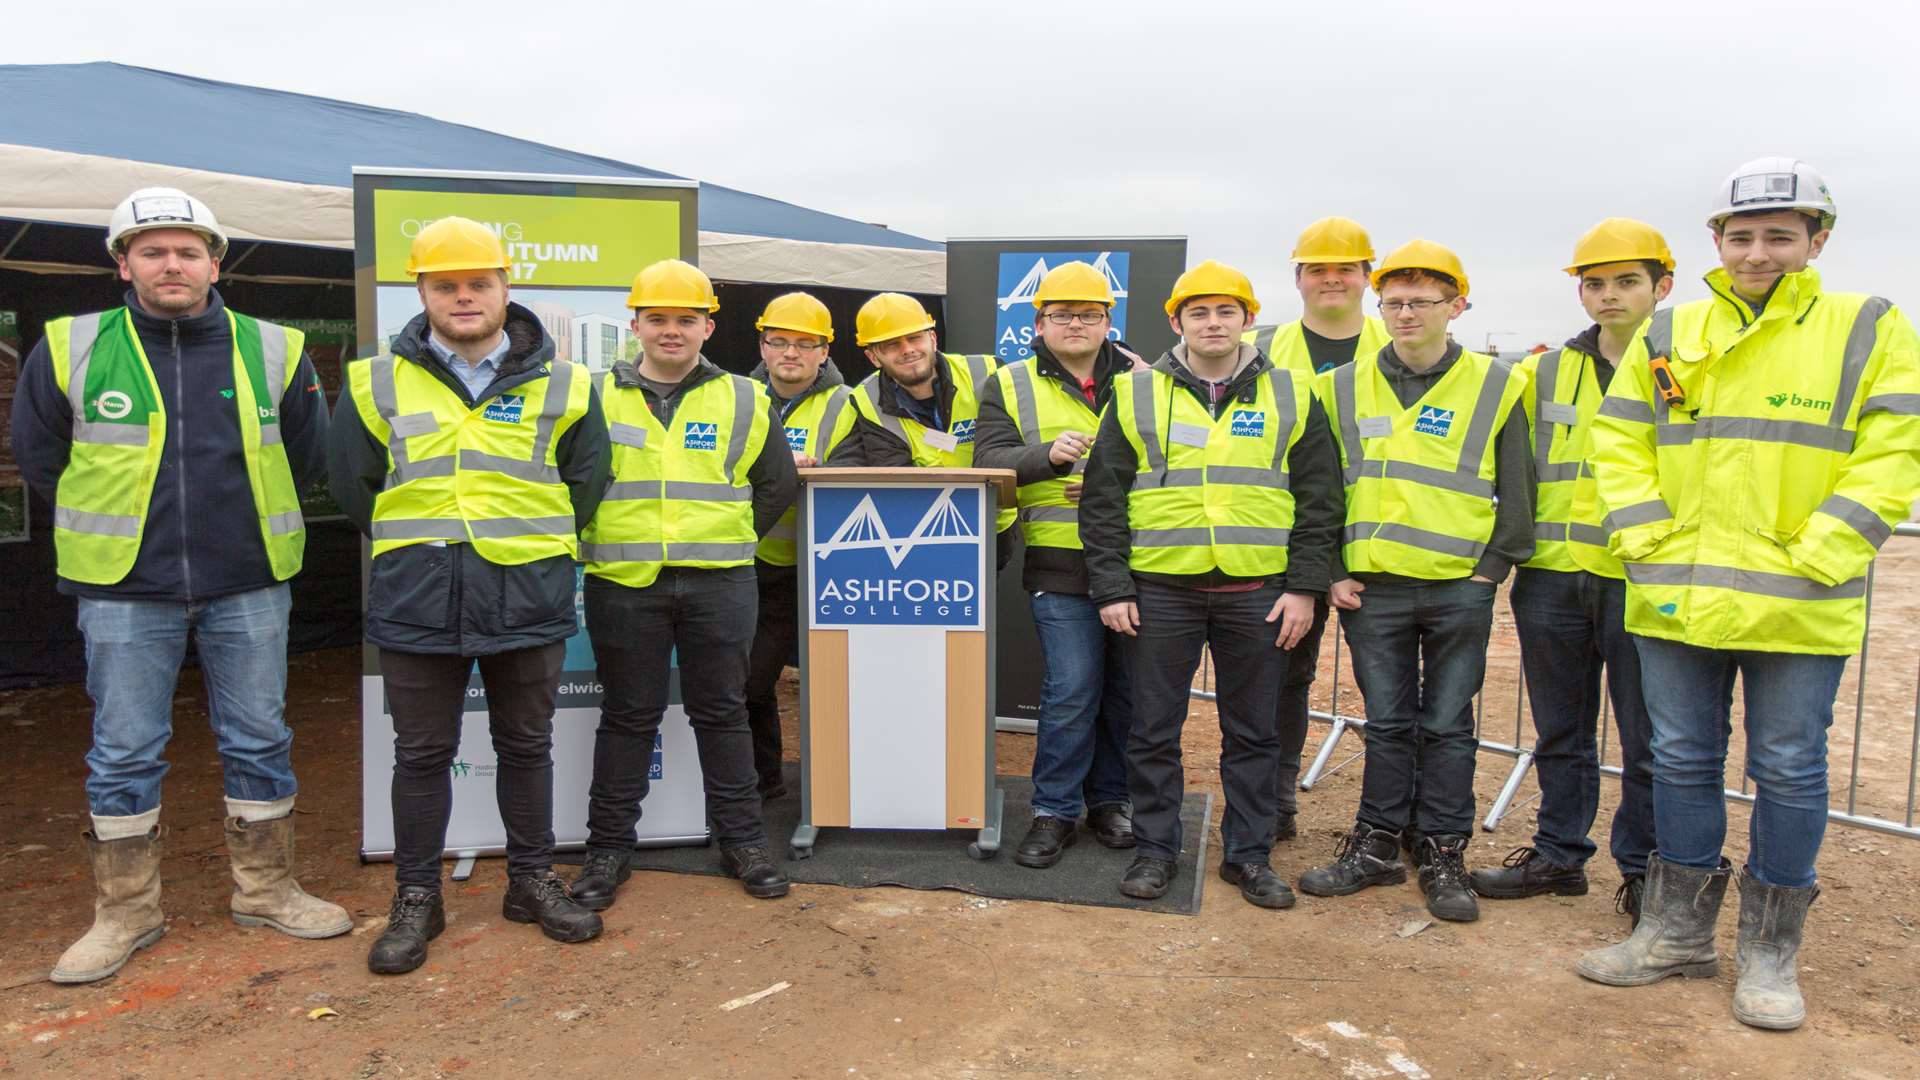 Engineering students and staff were given a tour of the new Ashford College campus being build on Elwick Road